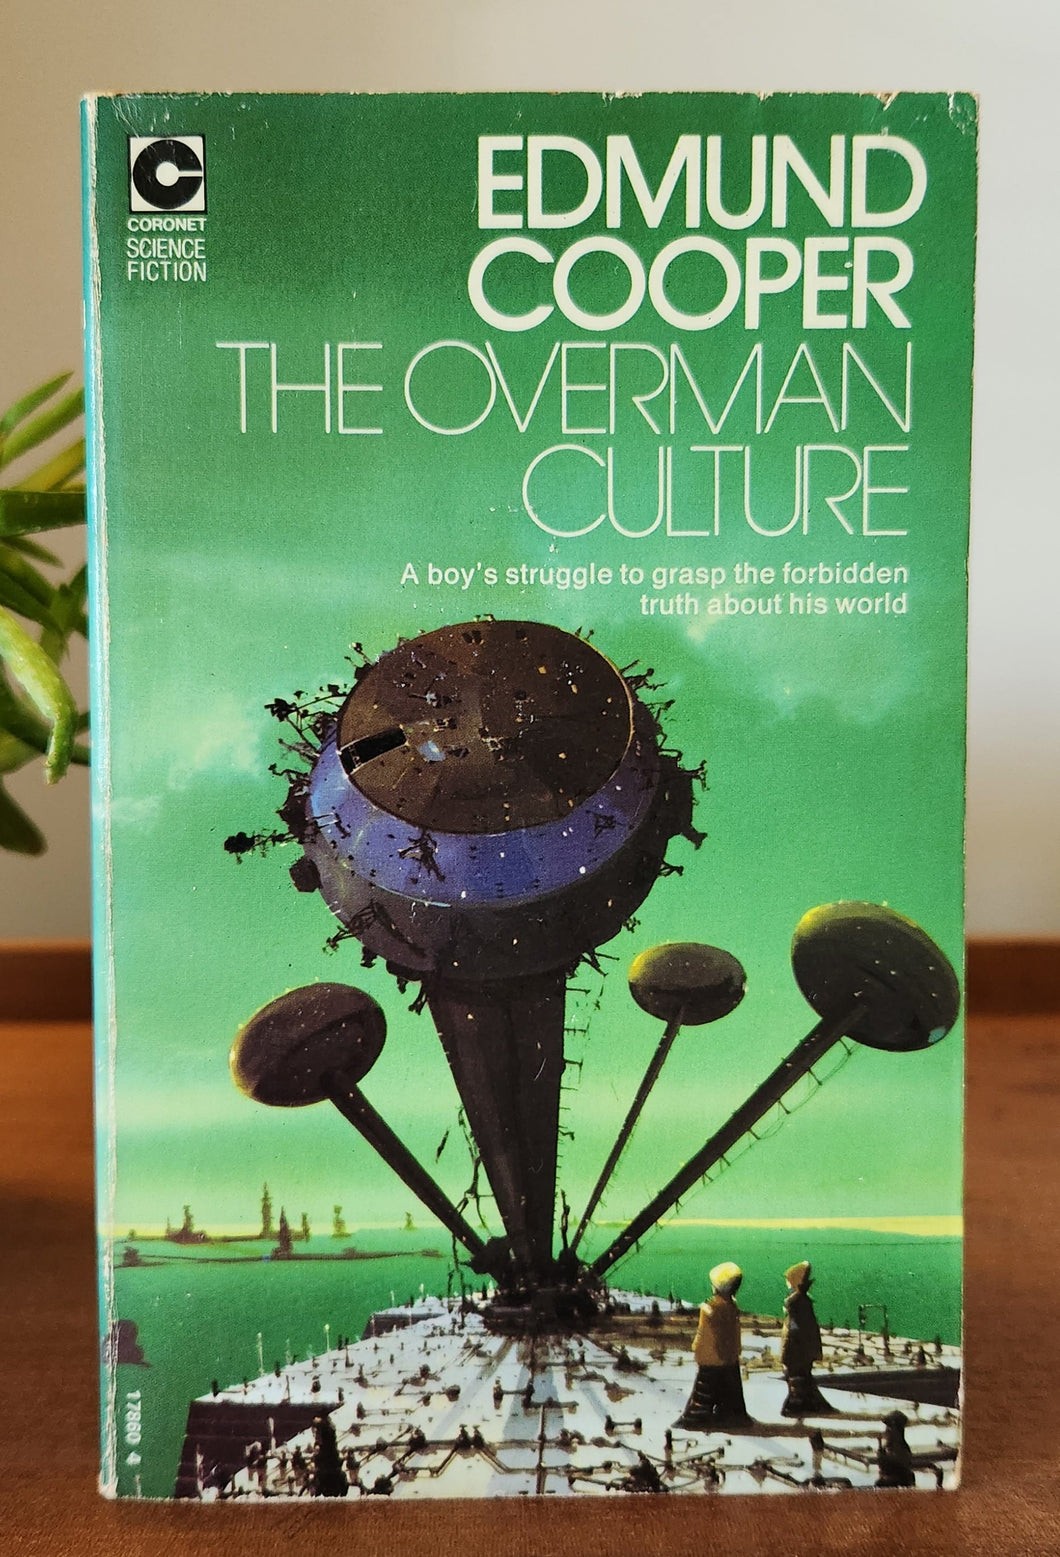 The Overman Culture by Edmund Cooper